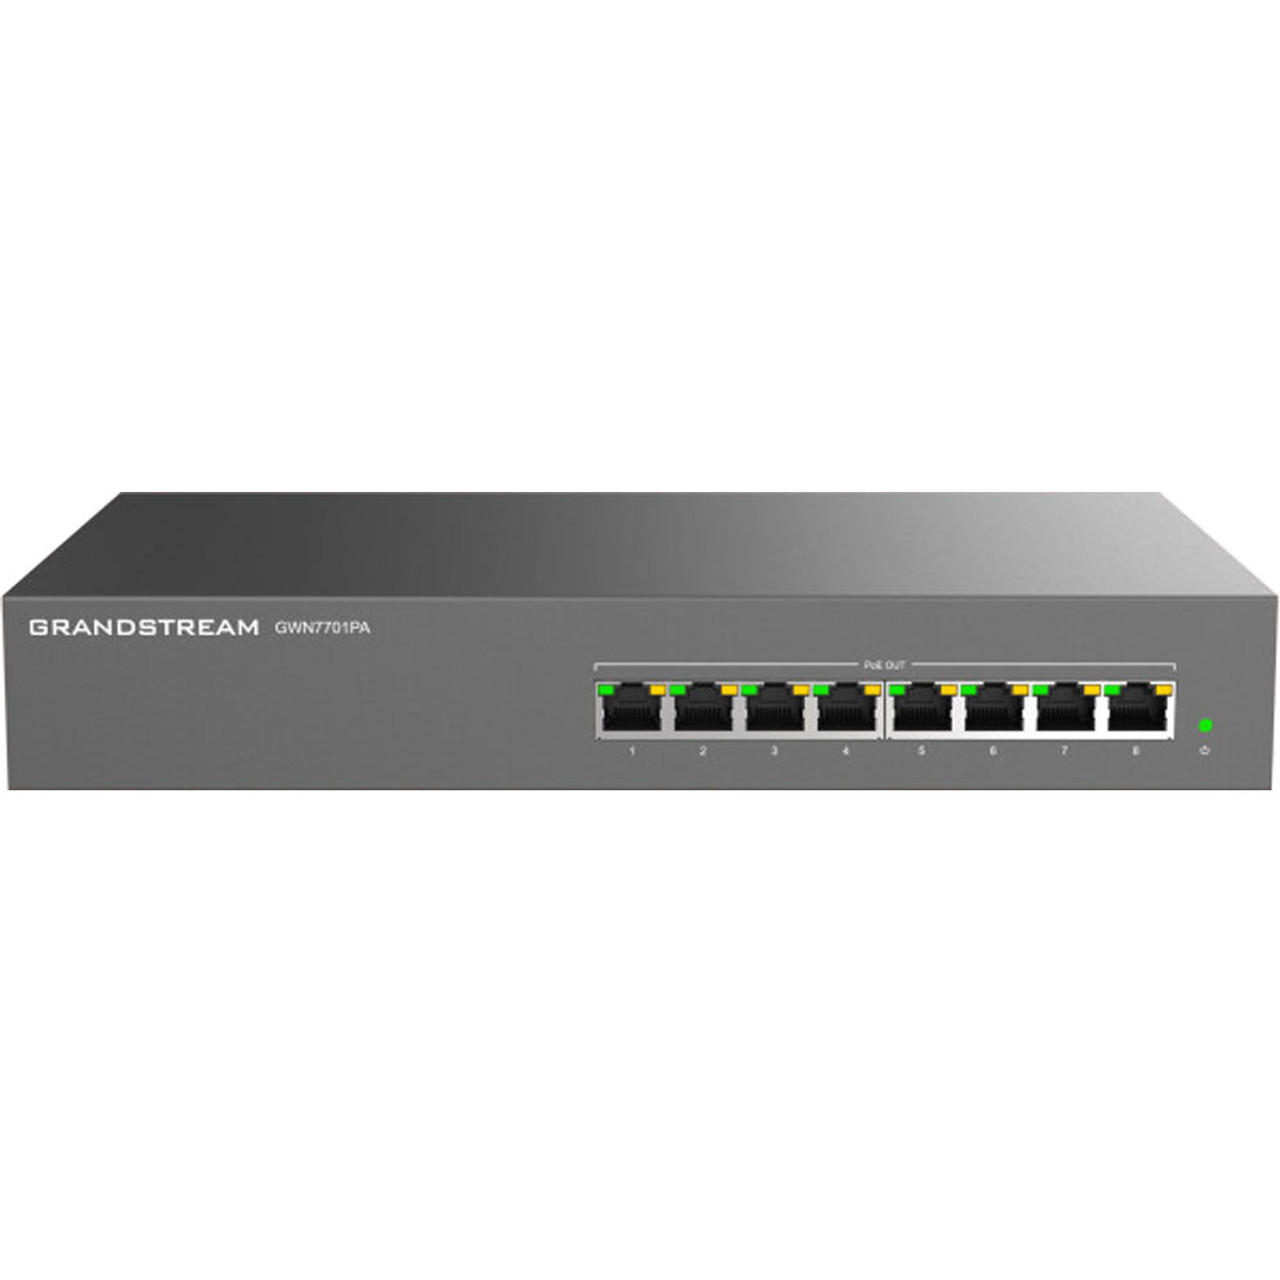 Grandstream GWN7701PA Unmanaged POE Switch - IP Phone Warehouse